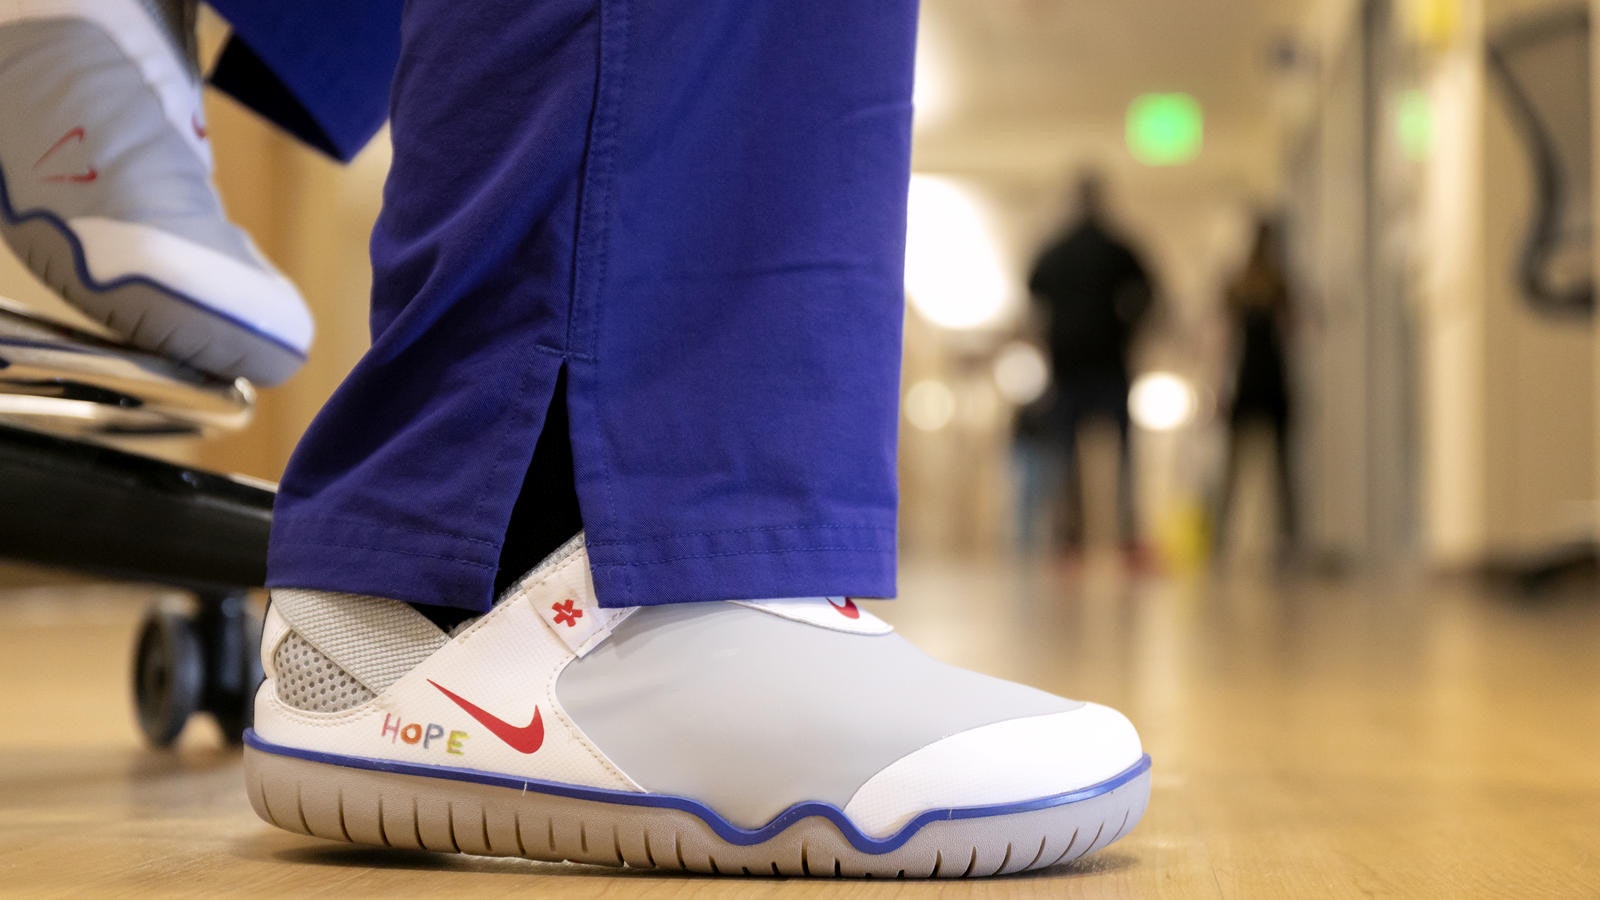 nike ground up design for medical workers